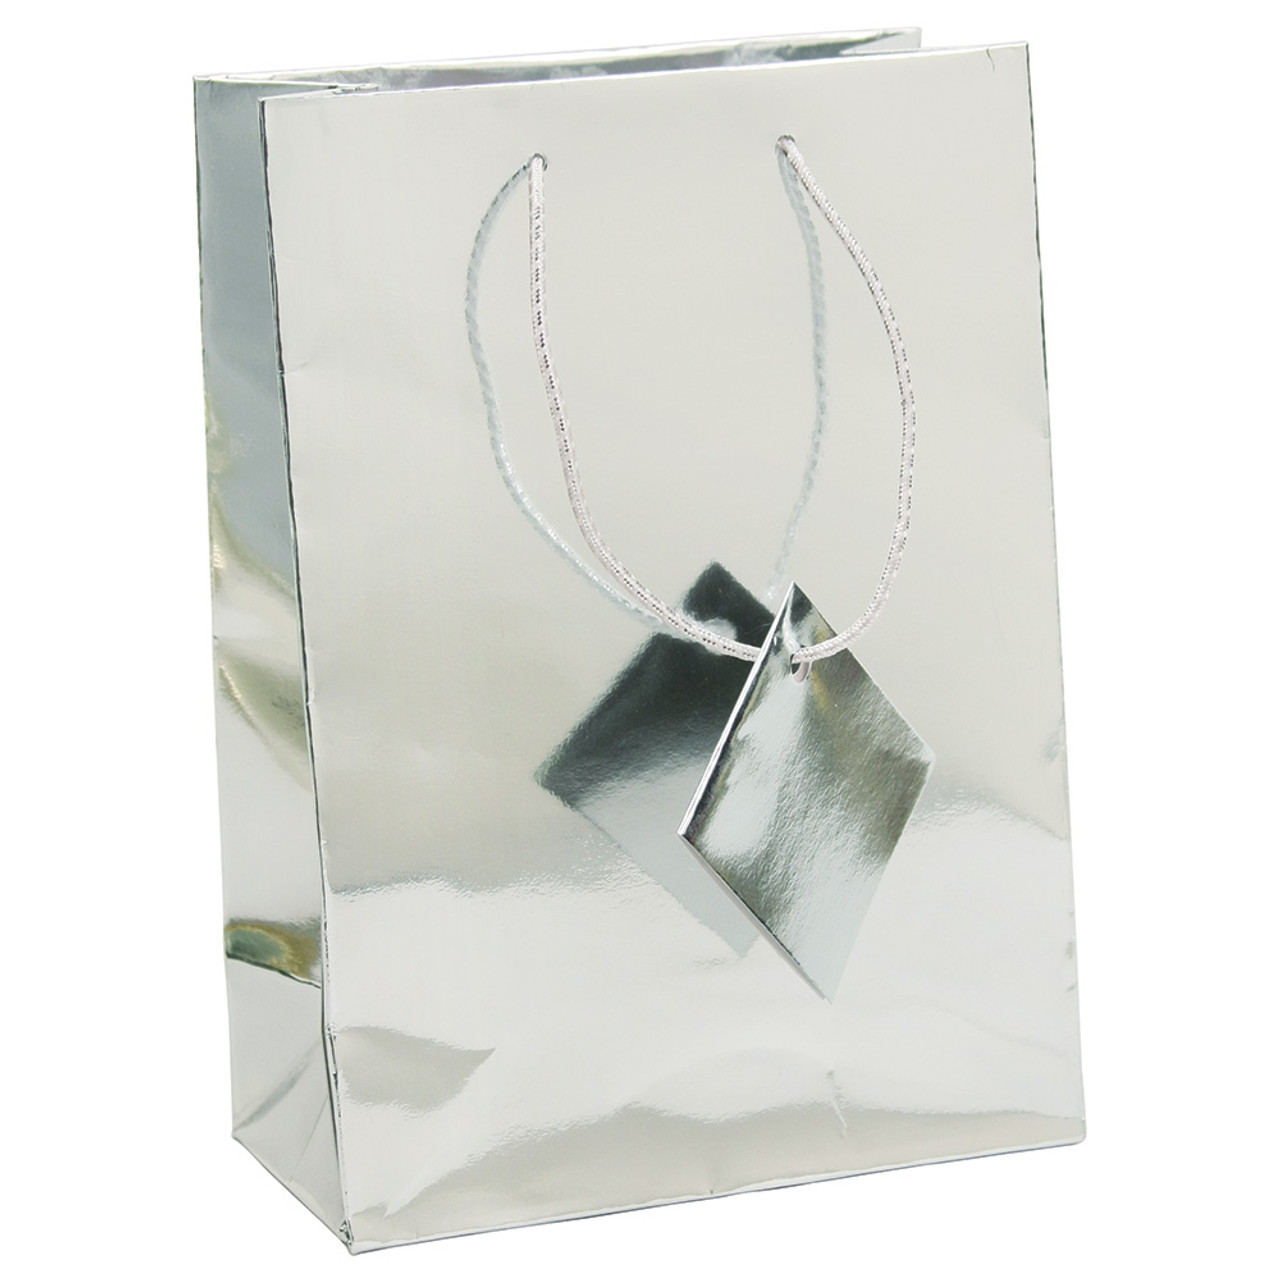 Tote Gift Bag , Metallic Gold, (Choose from various sizes),Price for 20  pieces - Eds Box & Supply Co.